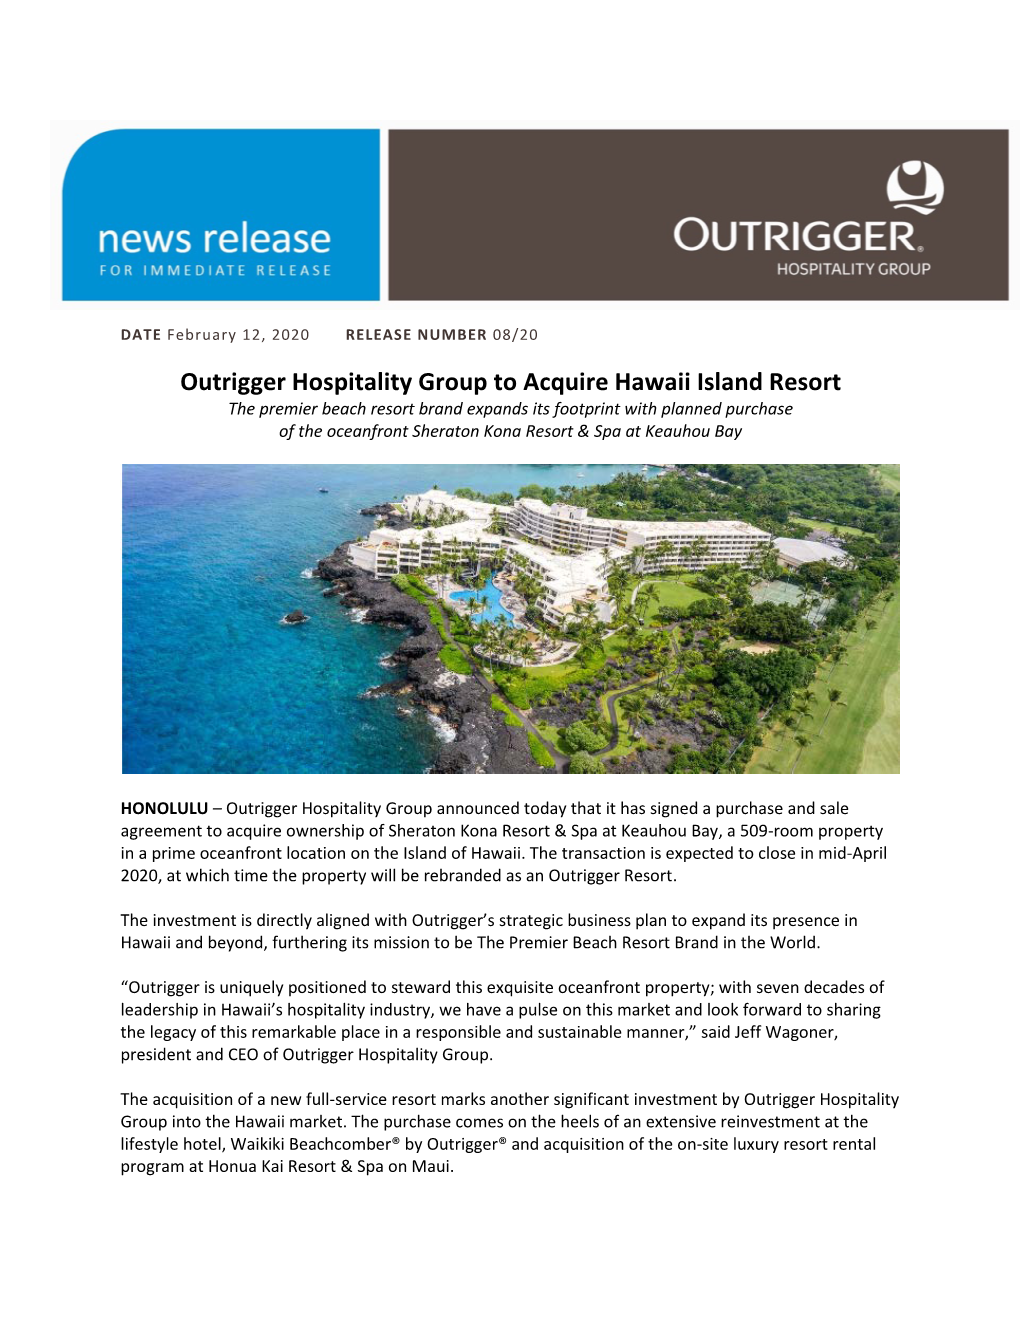 Outrigger Hospitality Group to Acquire Hawaii Island Resort